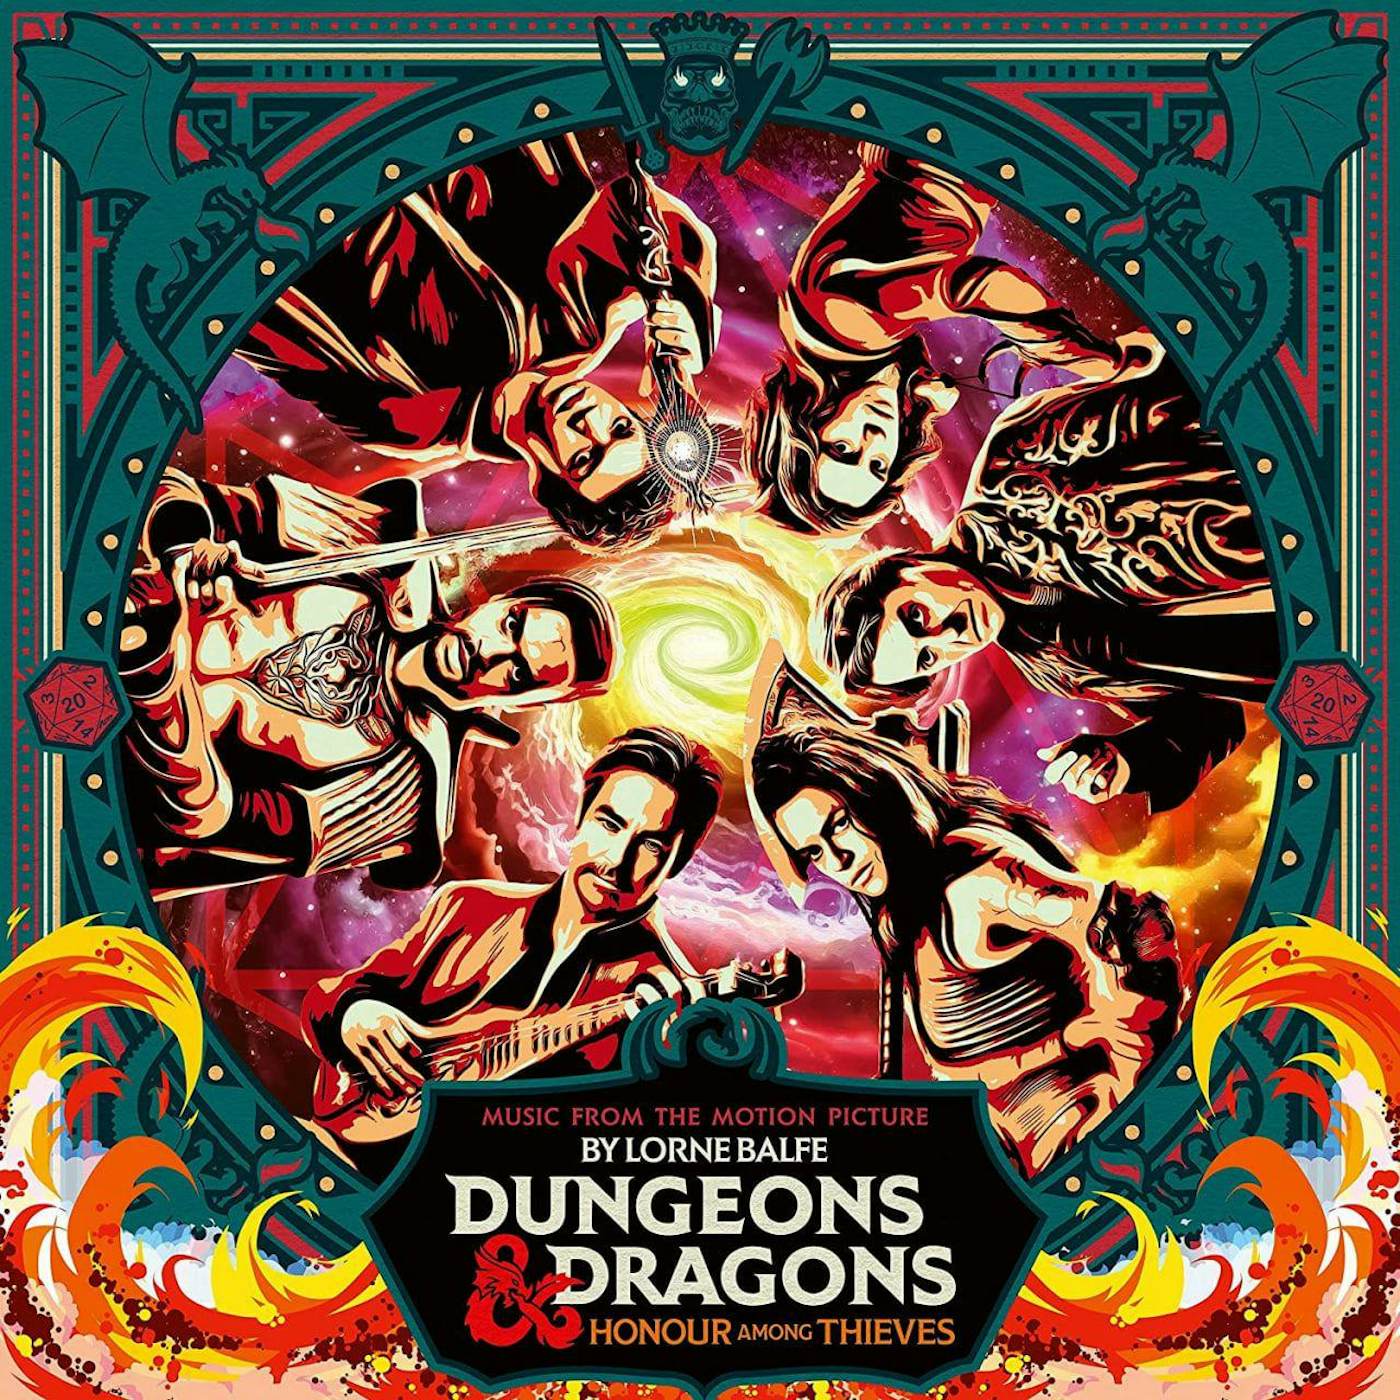 Lorne Balfe DUNGEONS & DRAGONS: HONOR AMONG THIEVES Original Soundtrack (DRAGON FIRE RED/2LP) Vinyl Record